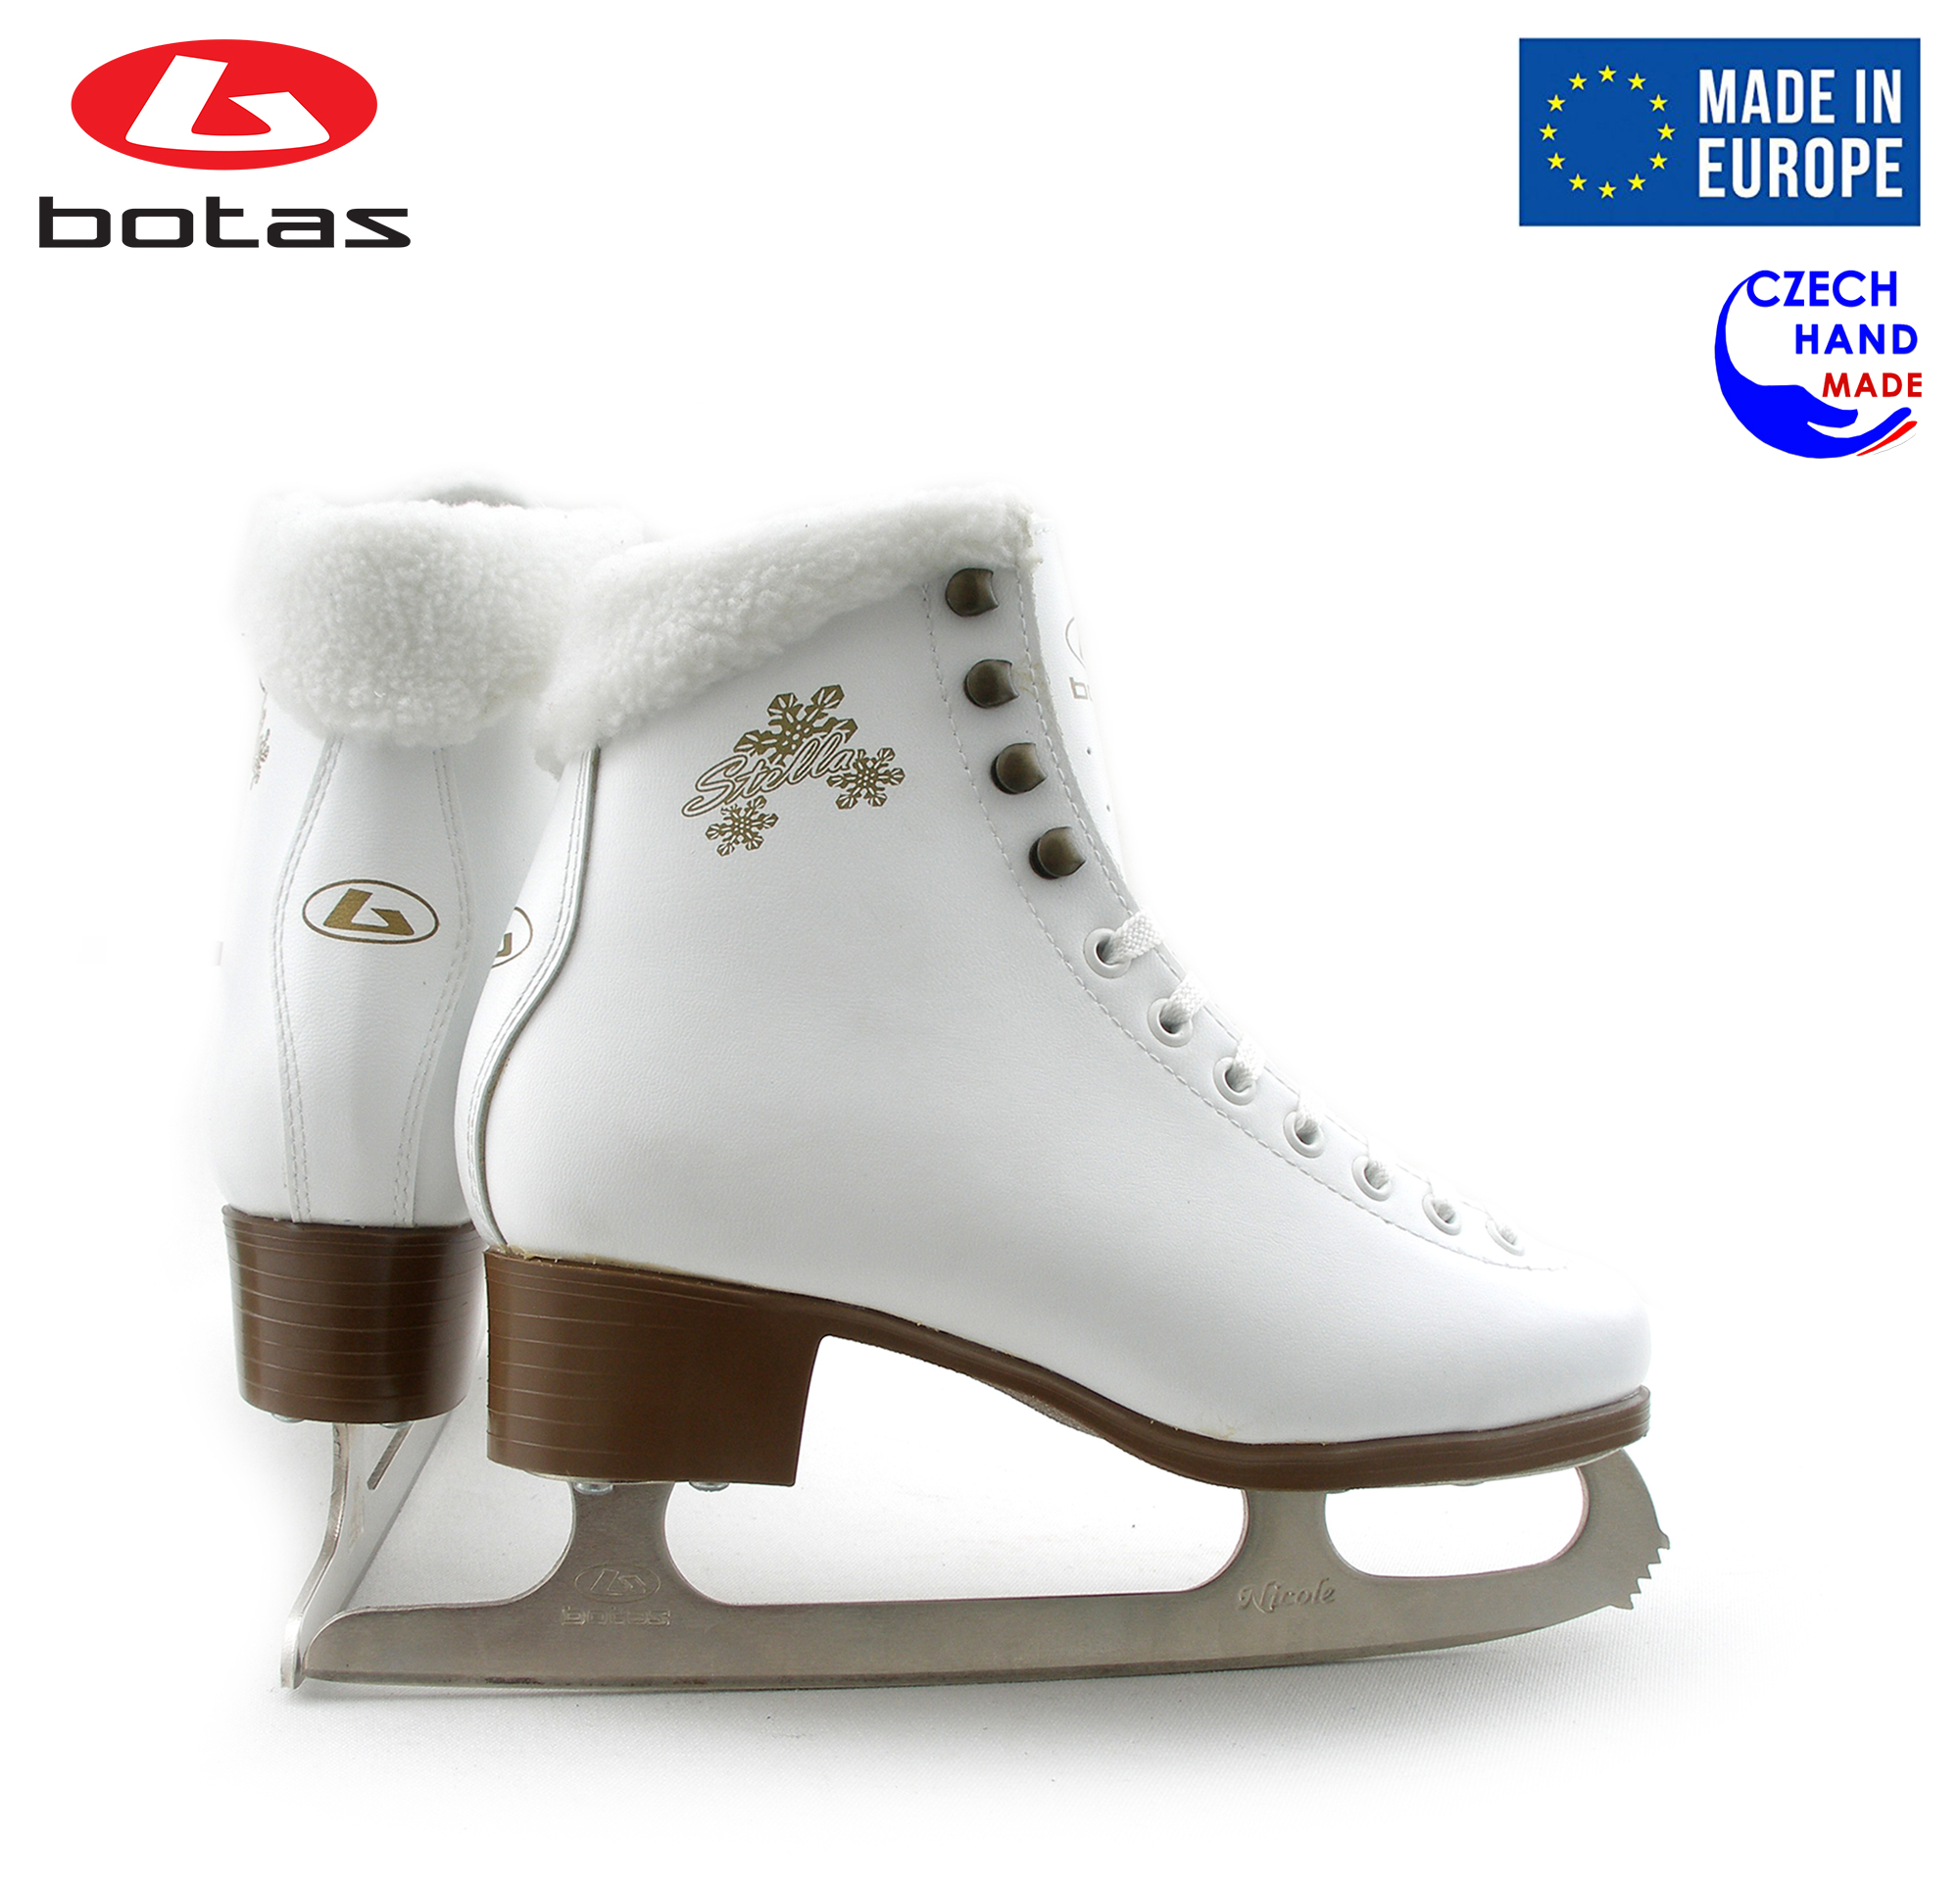 BOTAS - model: STELLA / Made in Europe (Czech Republic) / Innovated Elegant Figure Ice Skates for Girls, Kids / with Plush Collar / NICOLE blades / Color: White, Size: Kids 11 - image 5 of 6